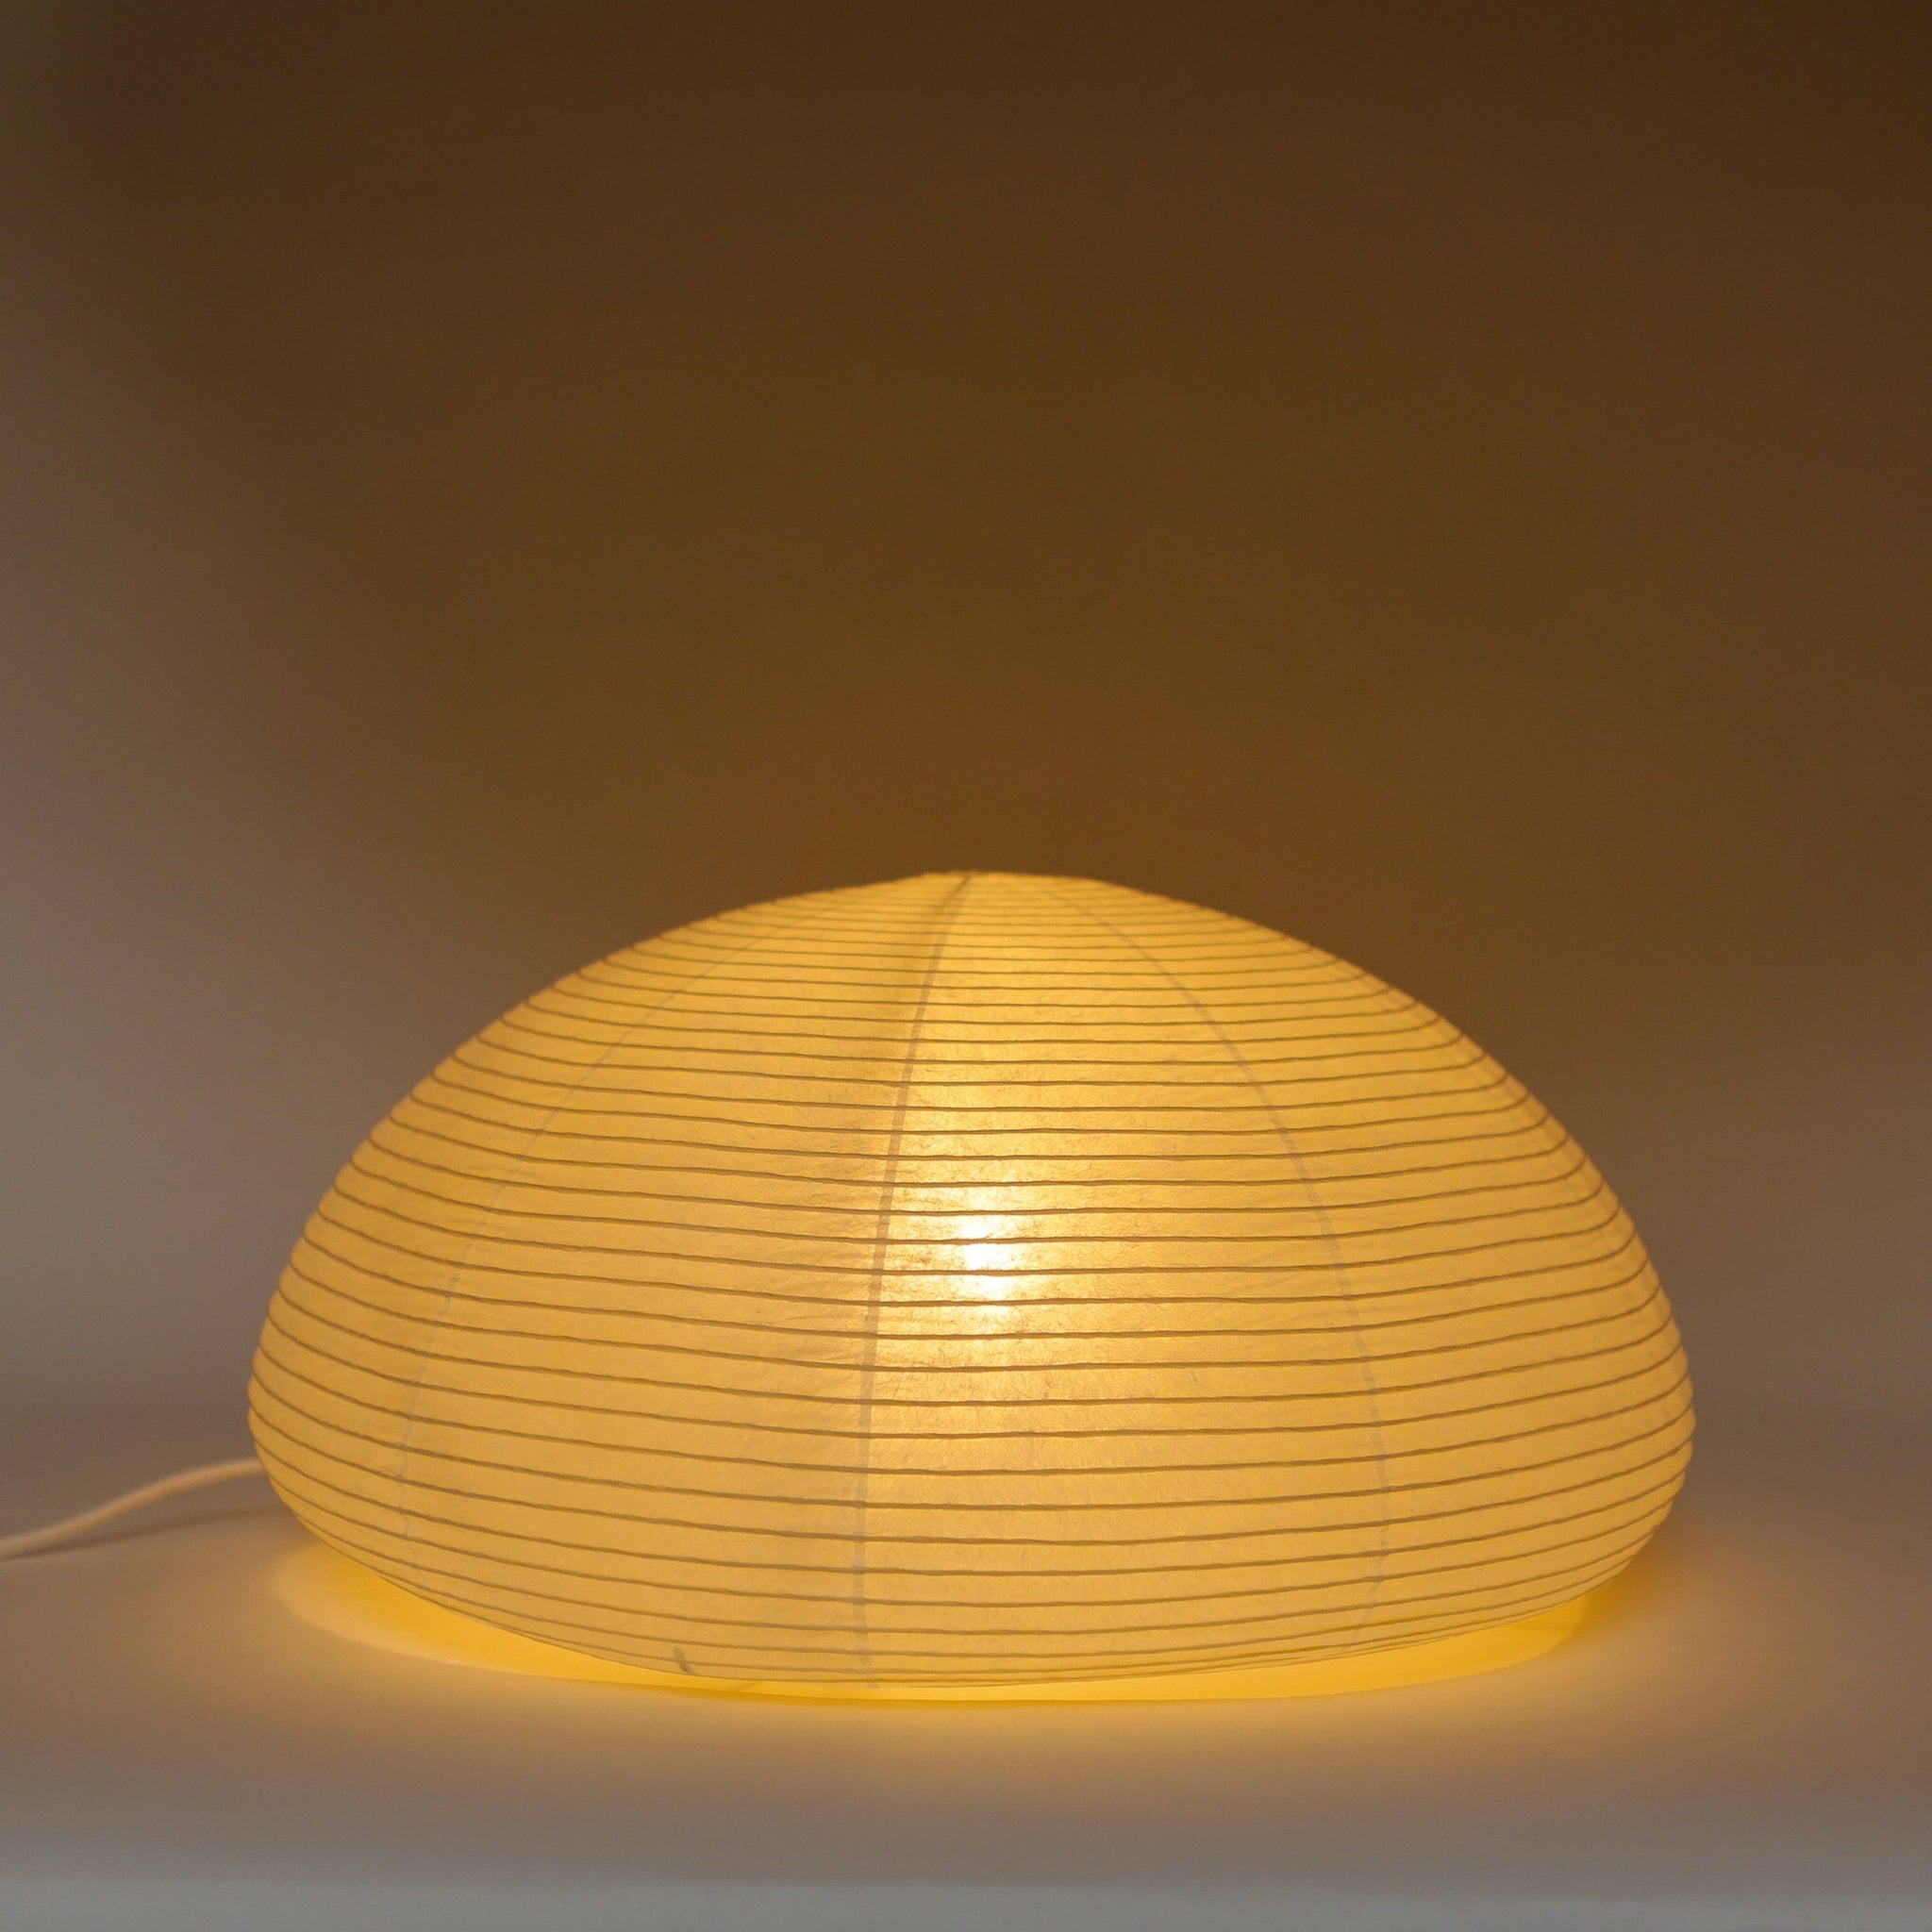 The Saucer - Paper Moon Table Lamp, No. 4